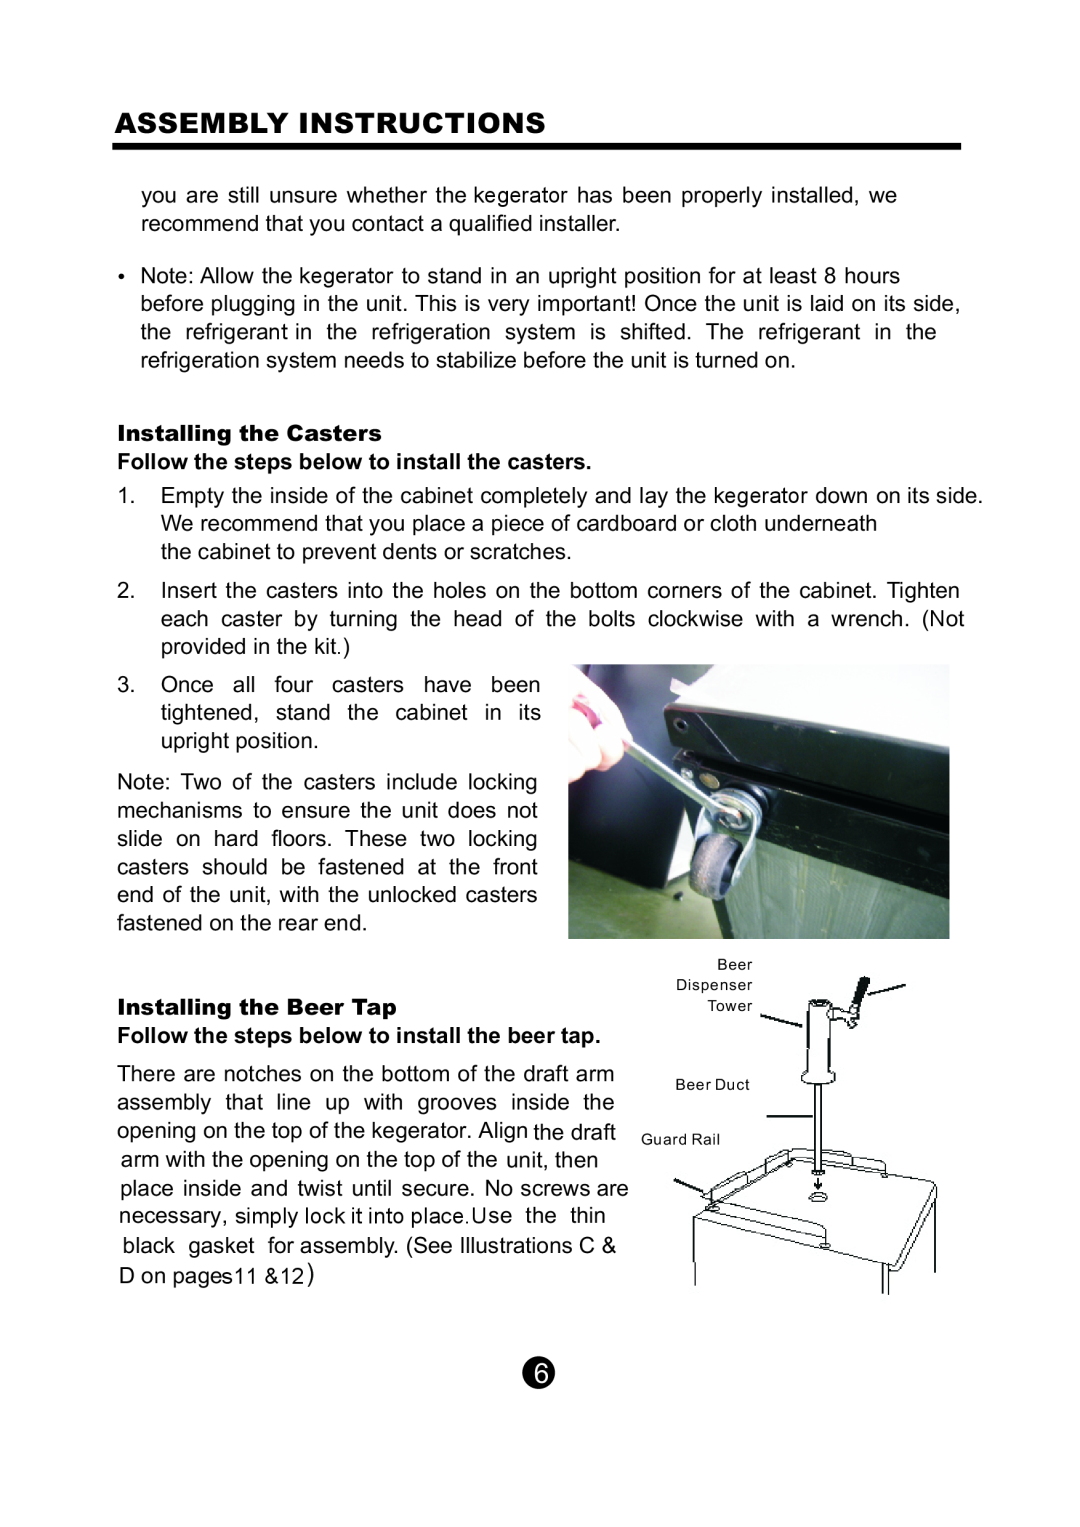 NewAir AK-200 owner manual Installing the Casters, Follow the steps below to install the casters, Installing the Beer Tap 